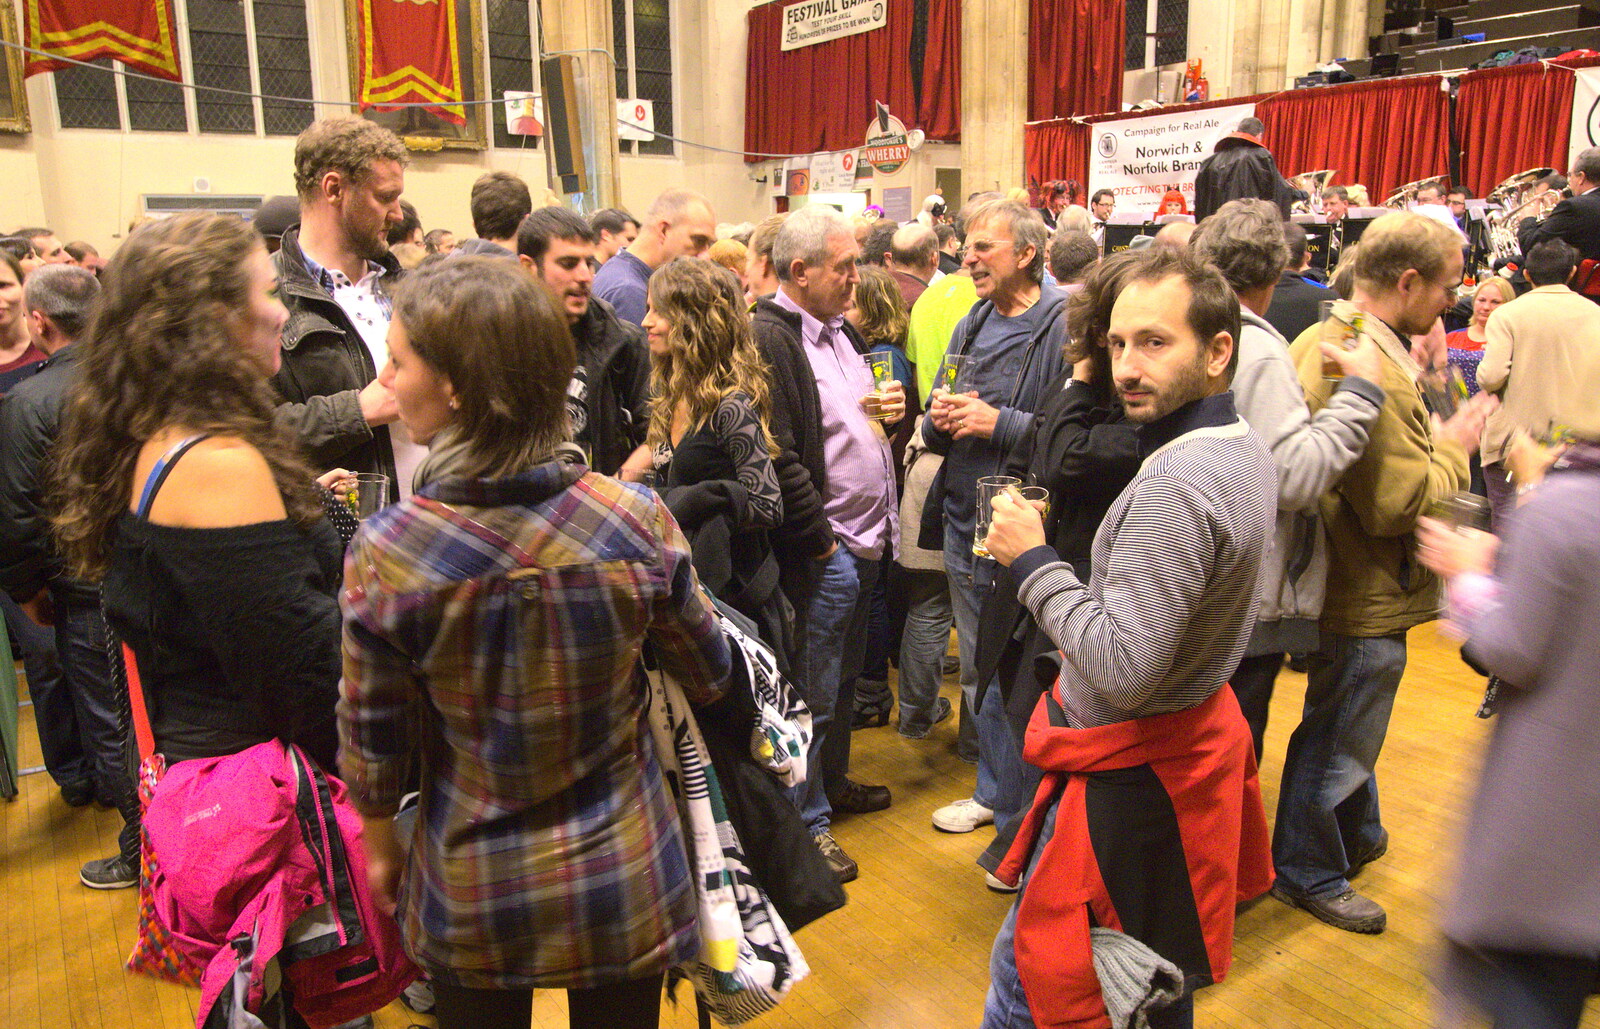 More beer swilling from The 35th Norwich Beer Festival, St. Andrew's Hall, Norwich - 31st October 2012